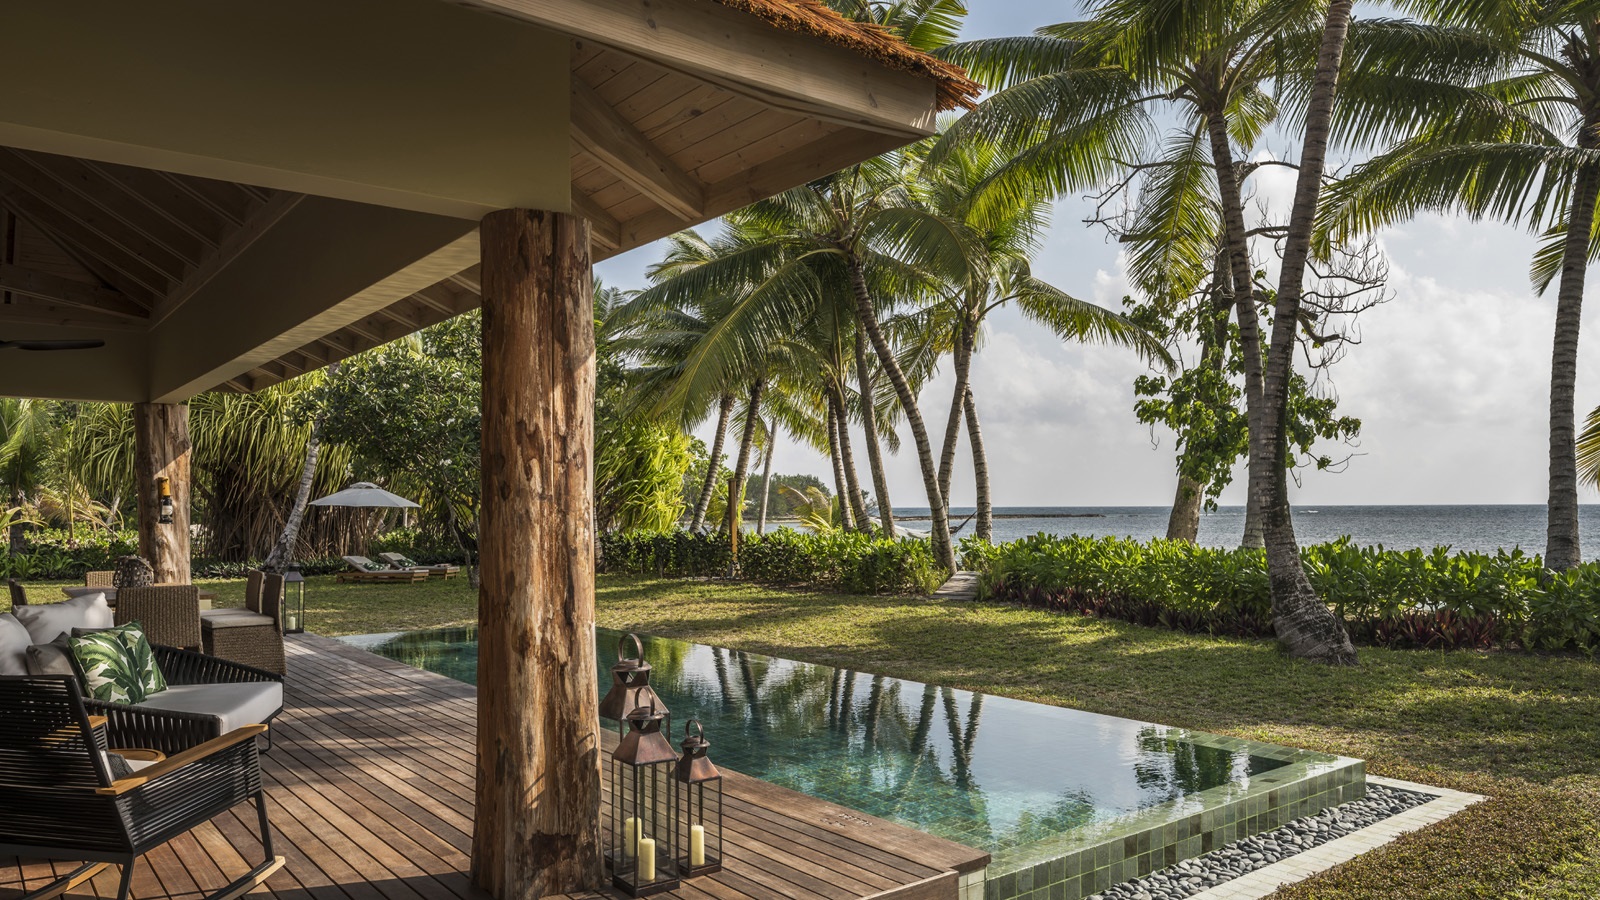 Four Seasons Resort Seychelles at Desroches Island will fully reopen on 15 March 2021. Since mid-December, the luxury resort has only been welcoming those guests who booked a stay in one of the Private Retreats. Click to enlarge.